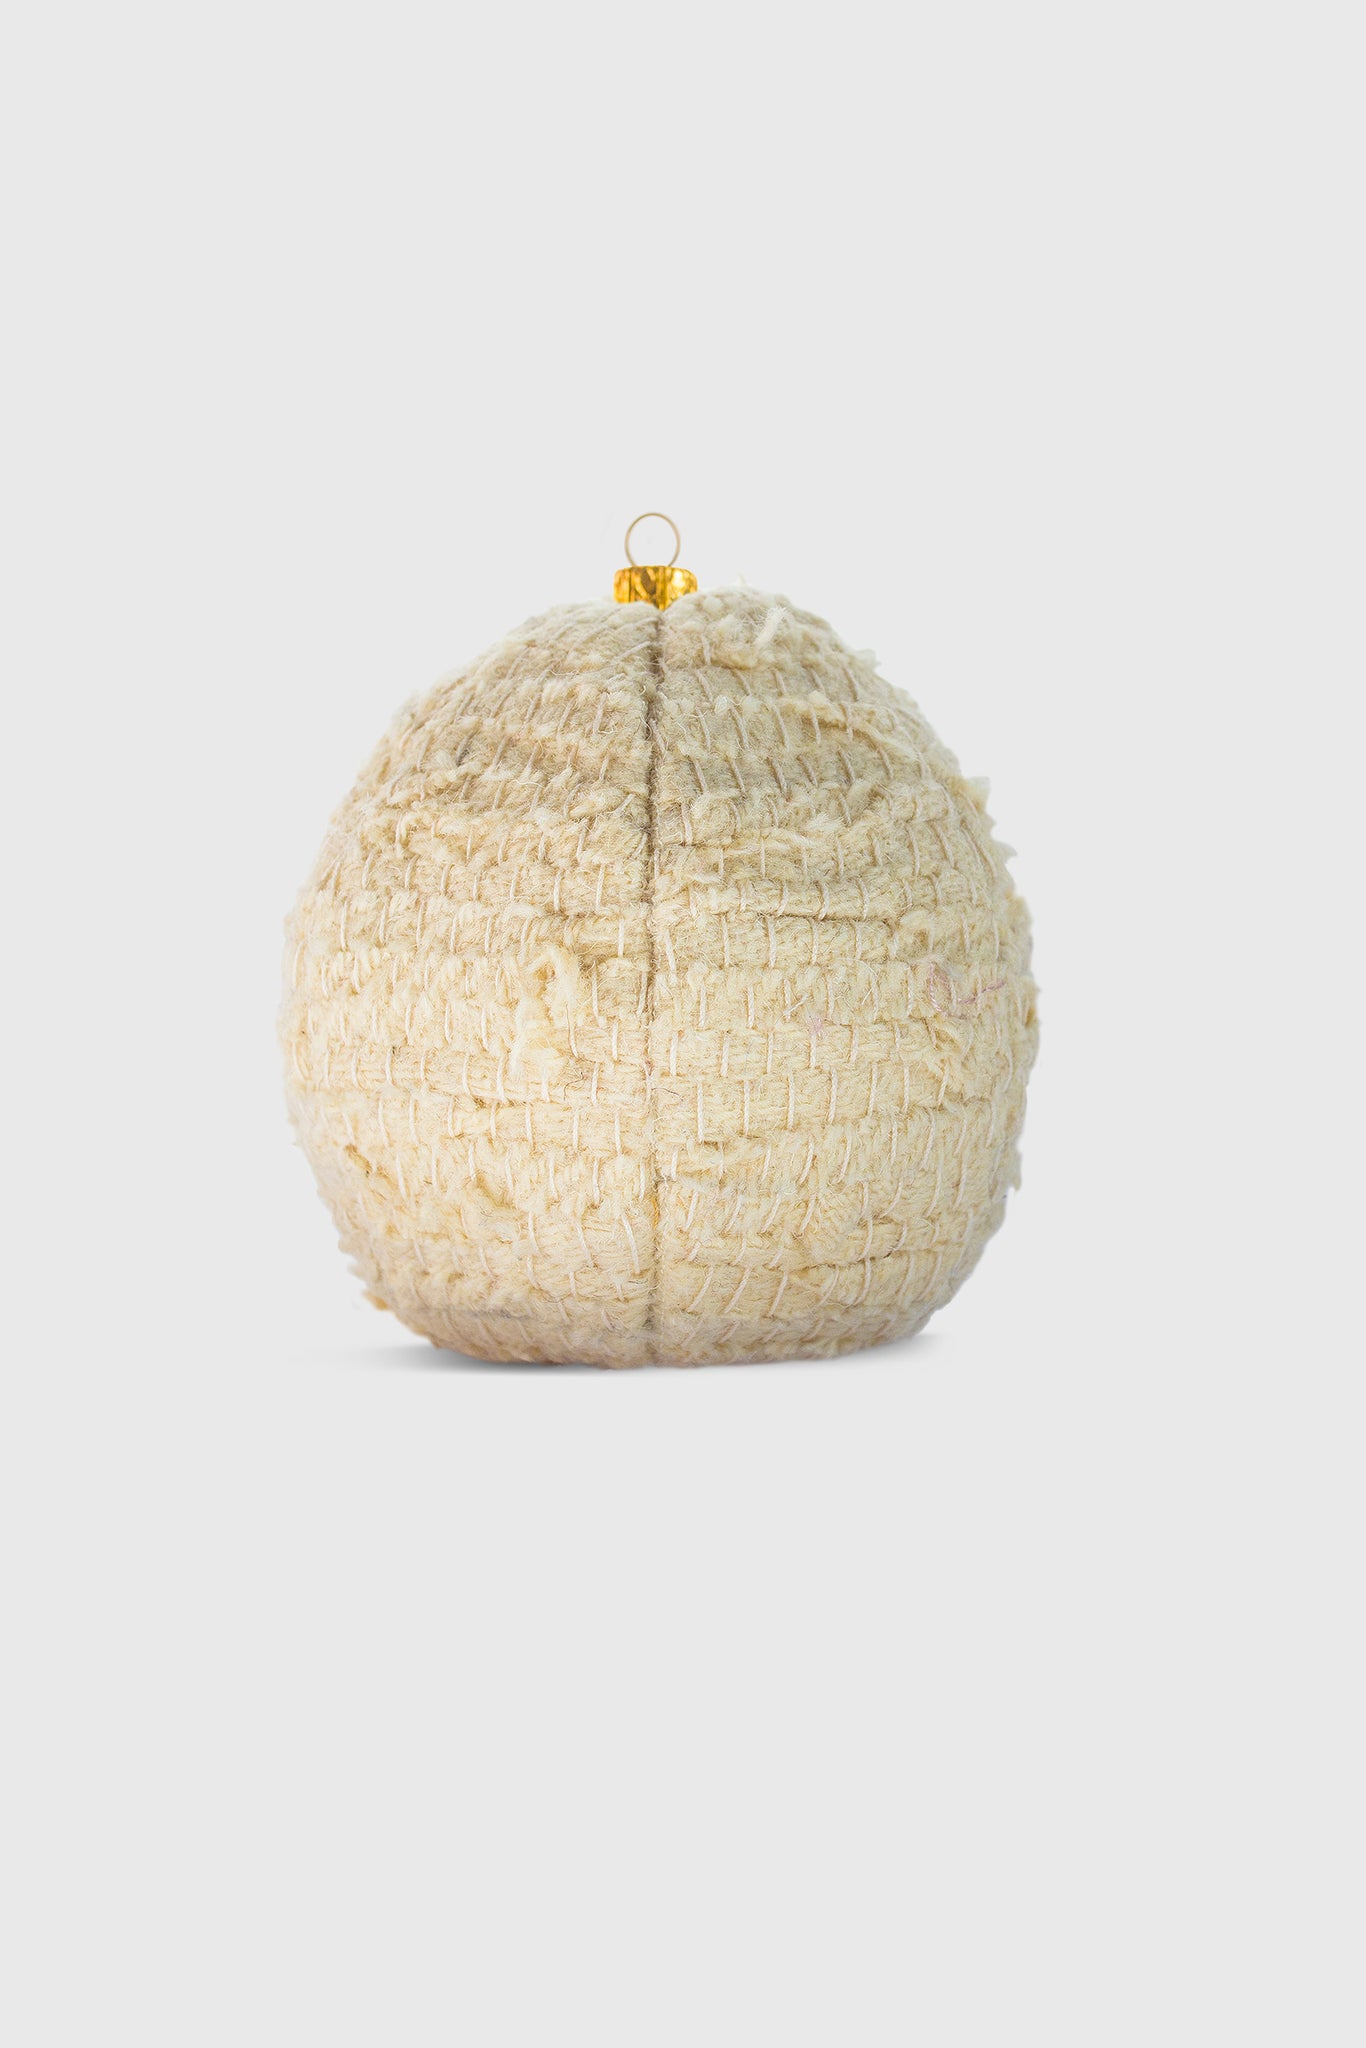 Ruxandra, organic shaped globe, giant tree ornament, crafted in textile, woven textile, 100% natural, pure white wool, undyed, classic style, Nordic,  beautiful